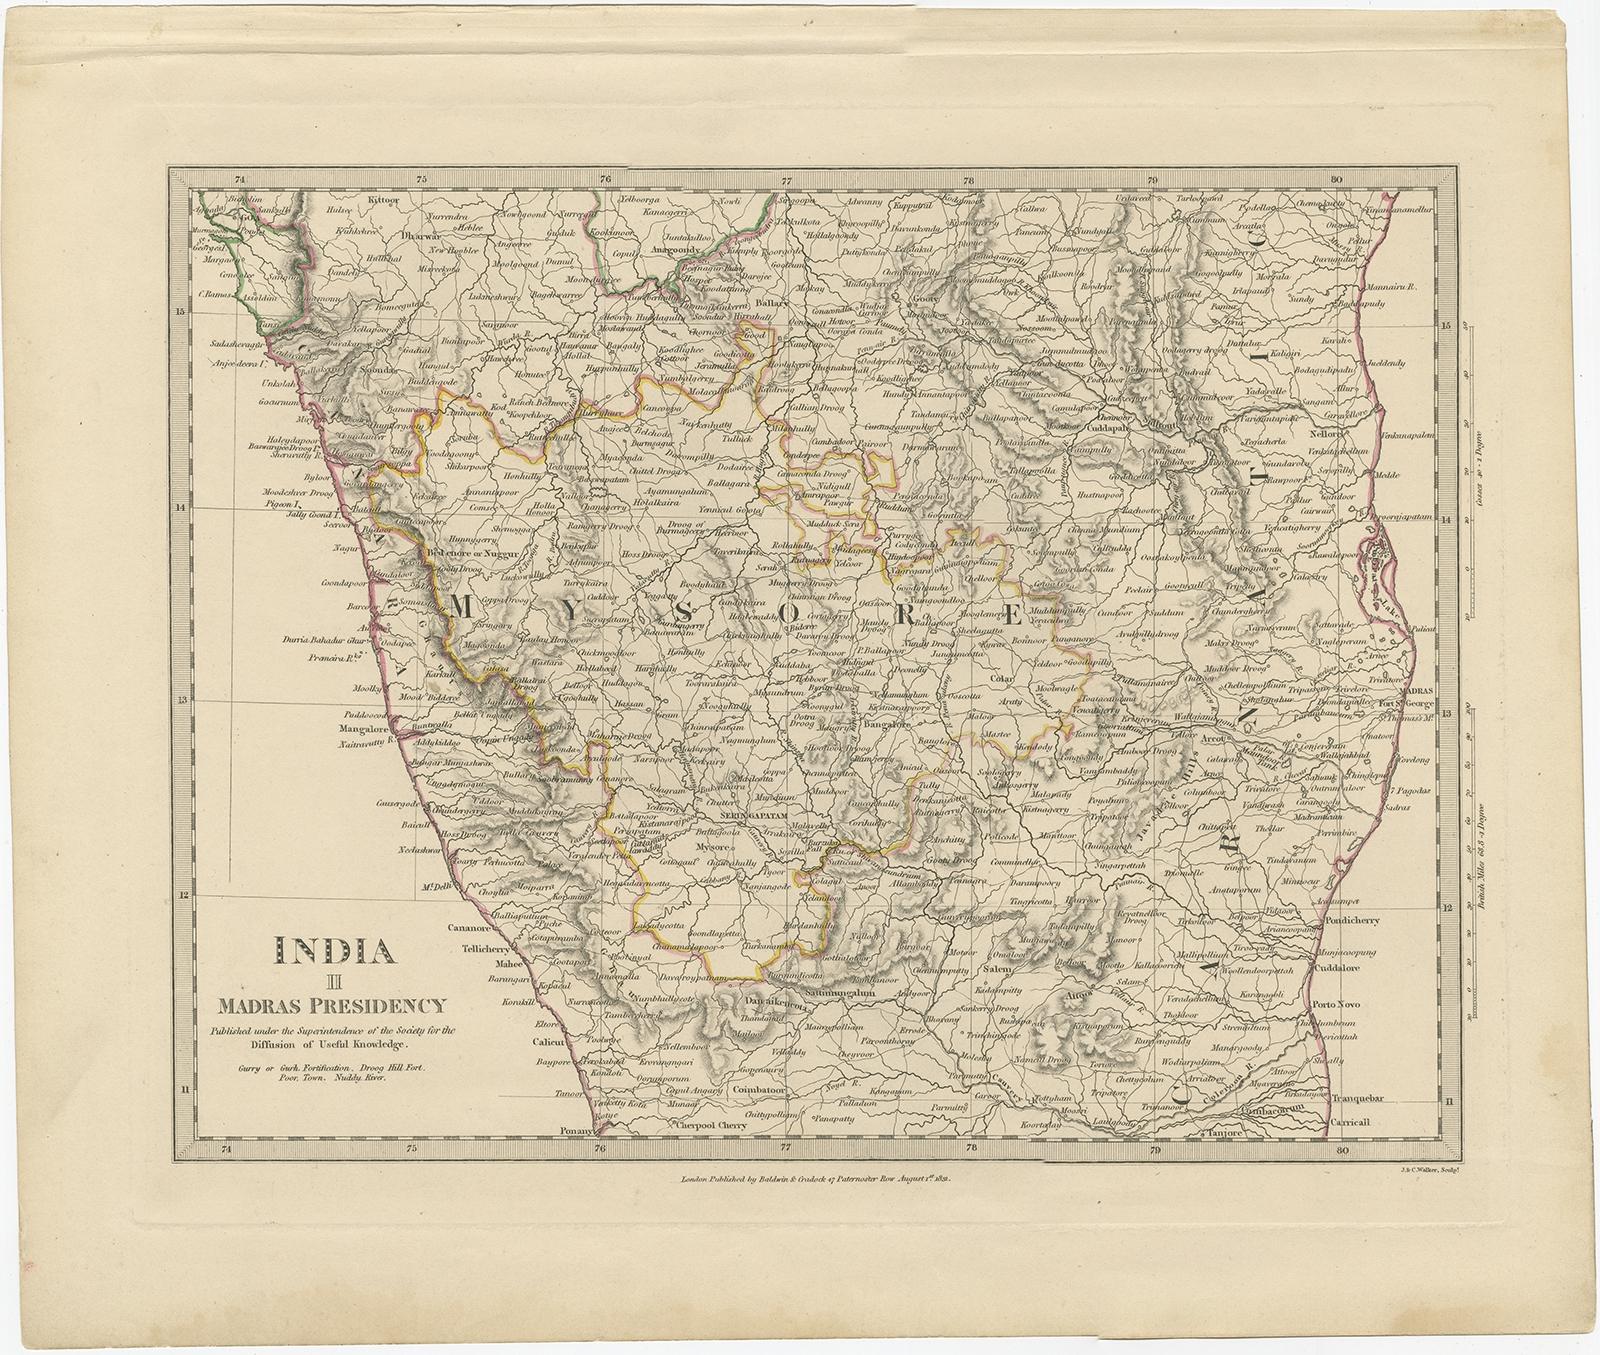 Antique map titled 'India II Madras Presidency'. 

Old steel engraved map of the western part of the Madras Presidency. The Madras Presidency, or the Presidency of Fort St. George, and also known as Madras Province, was an administrative subdivision